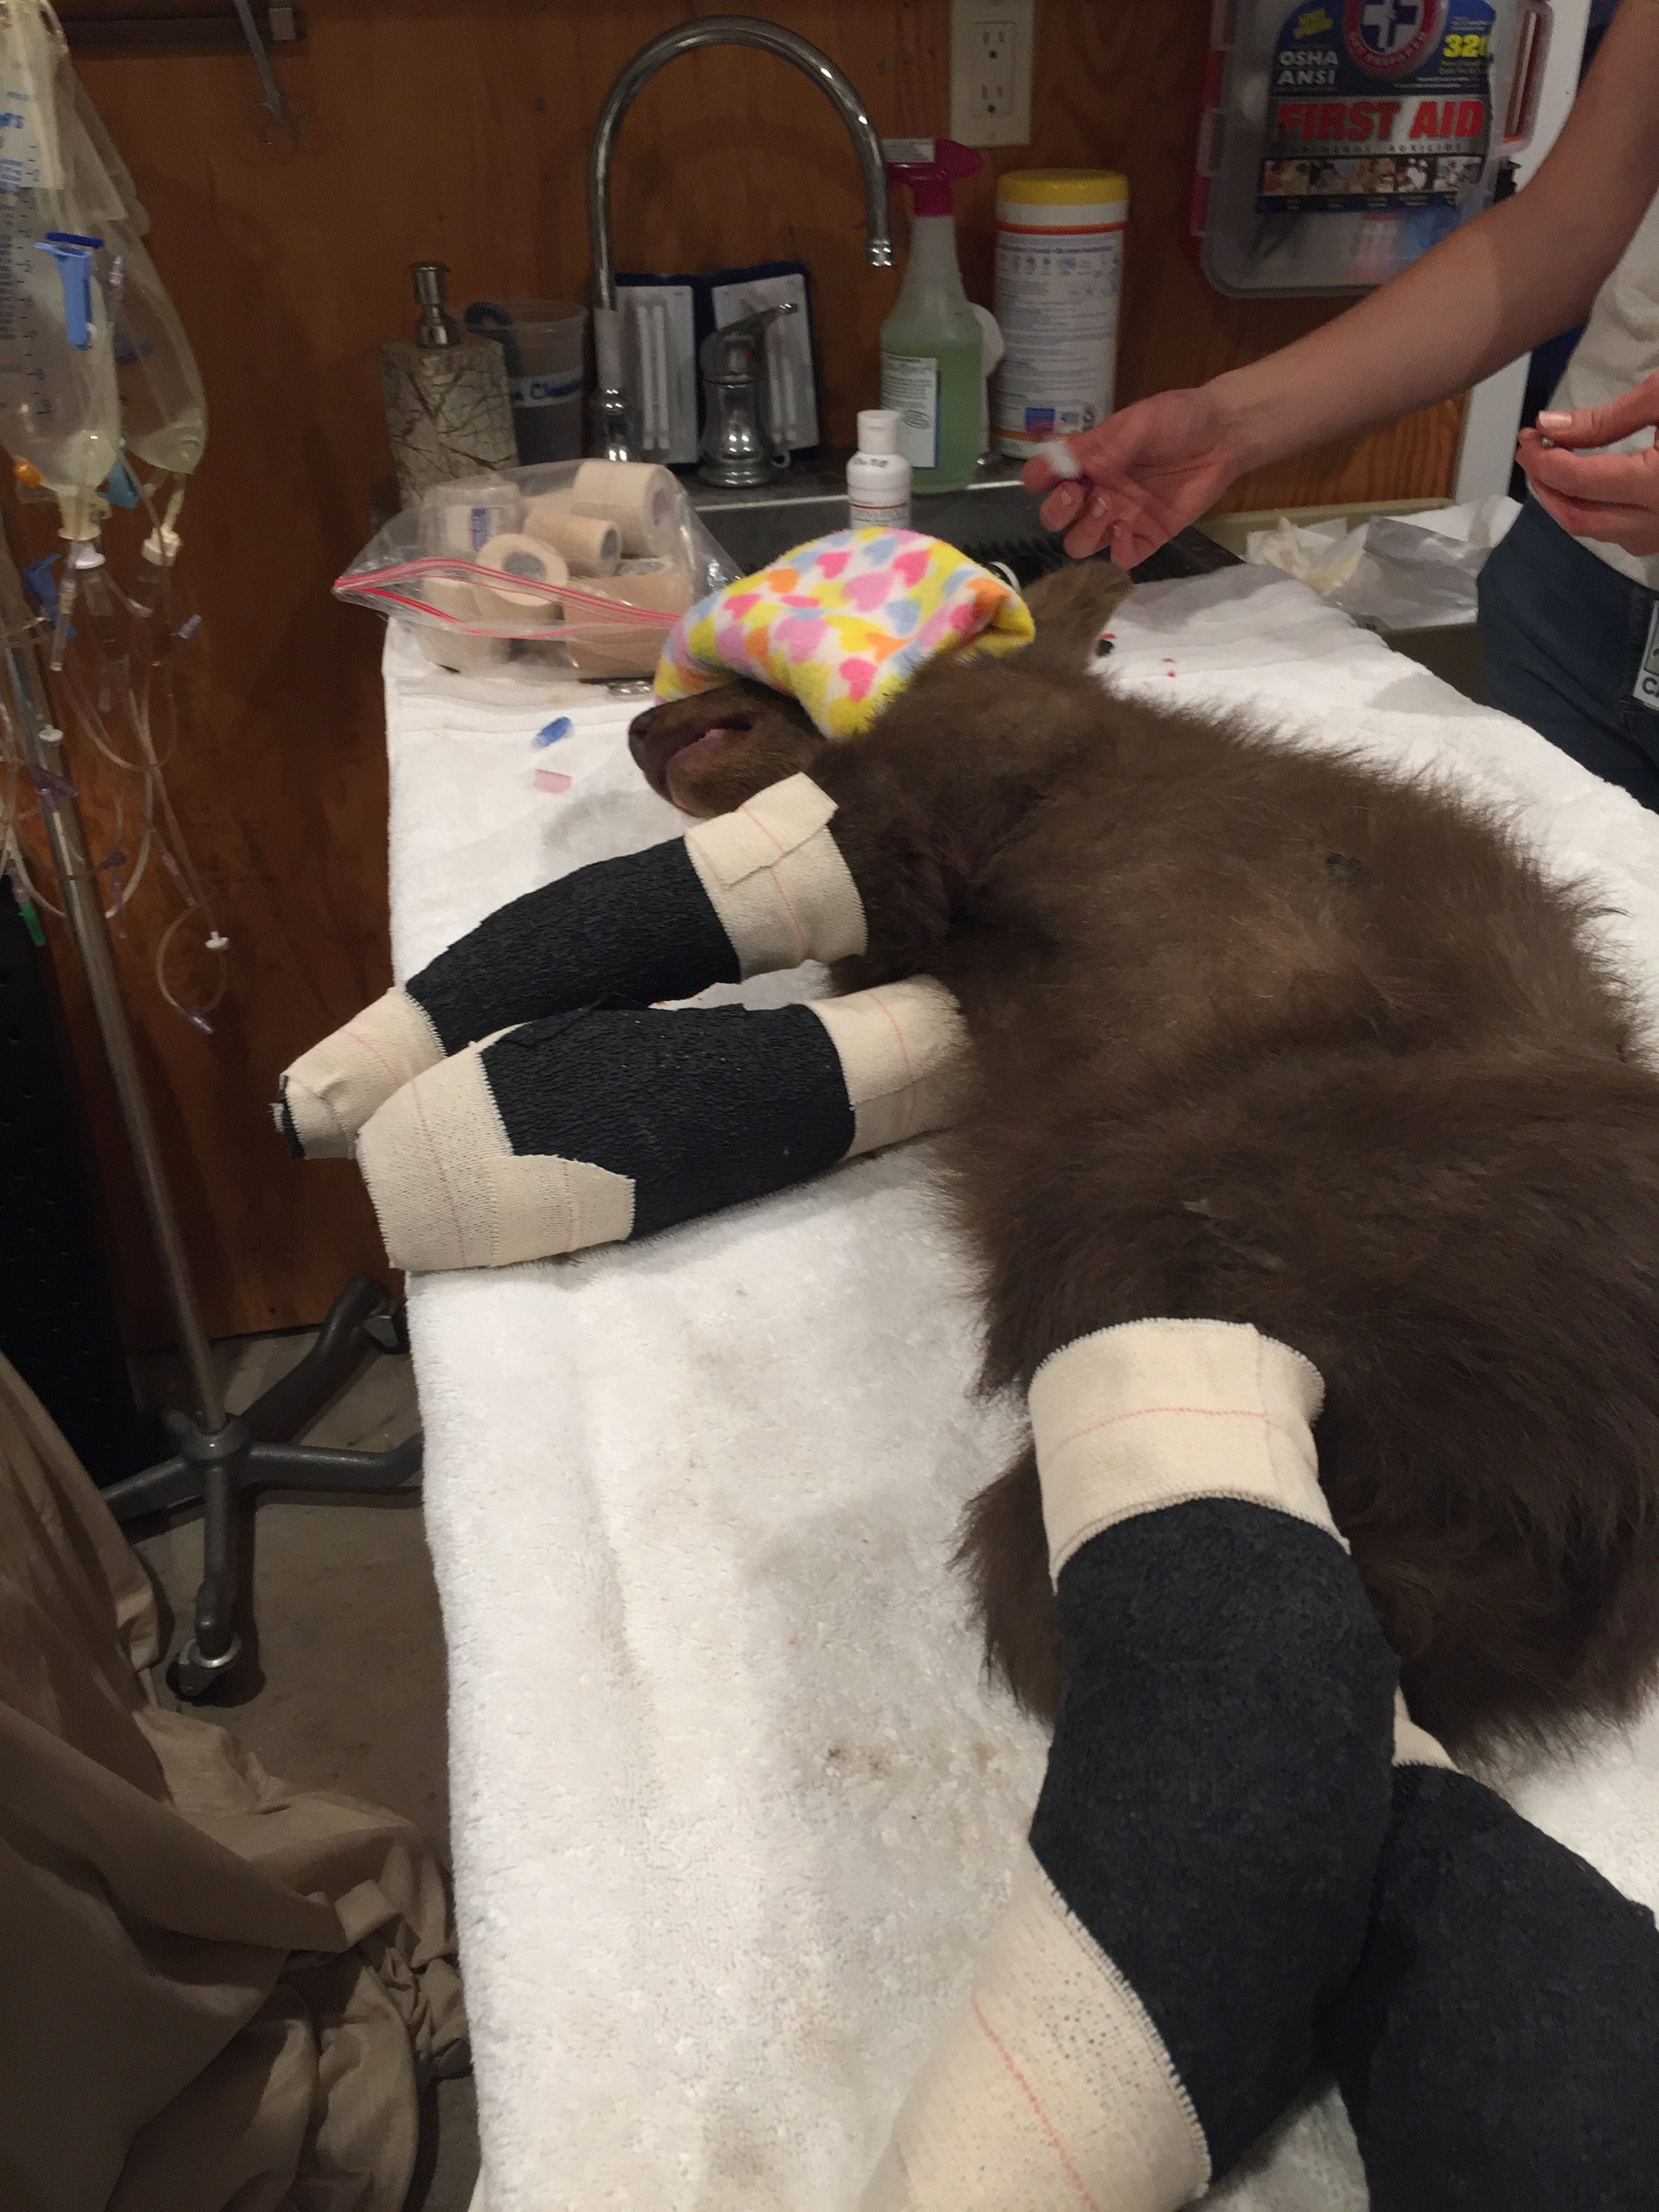 A black bear cub is recovering in California after being rescued Sunday from the Tamarack wildfire